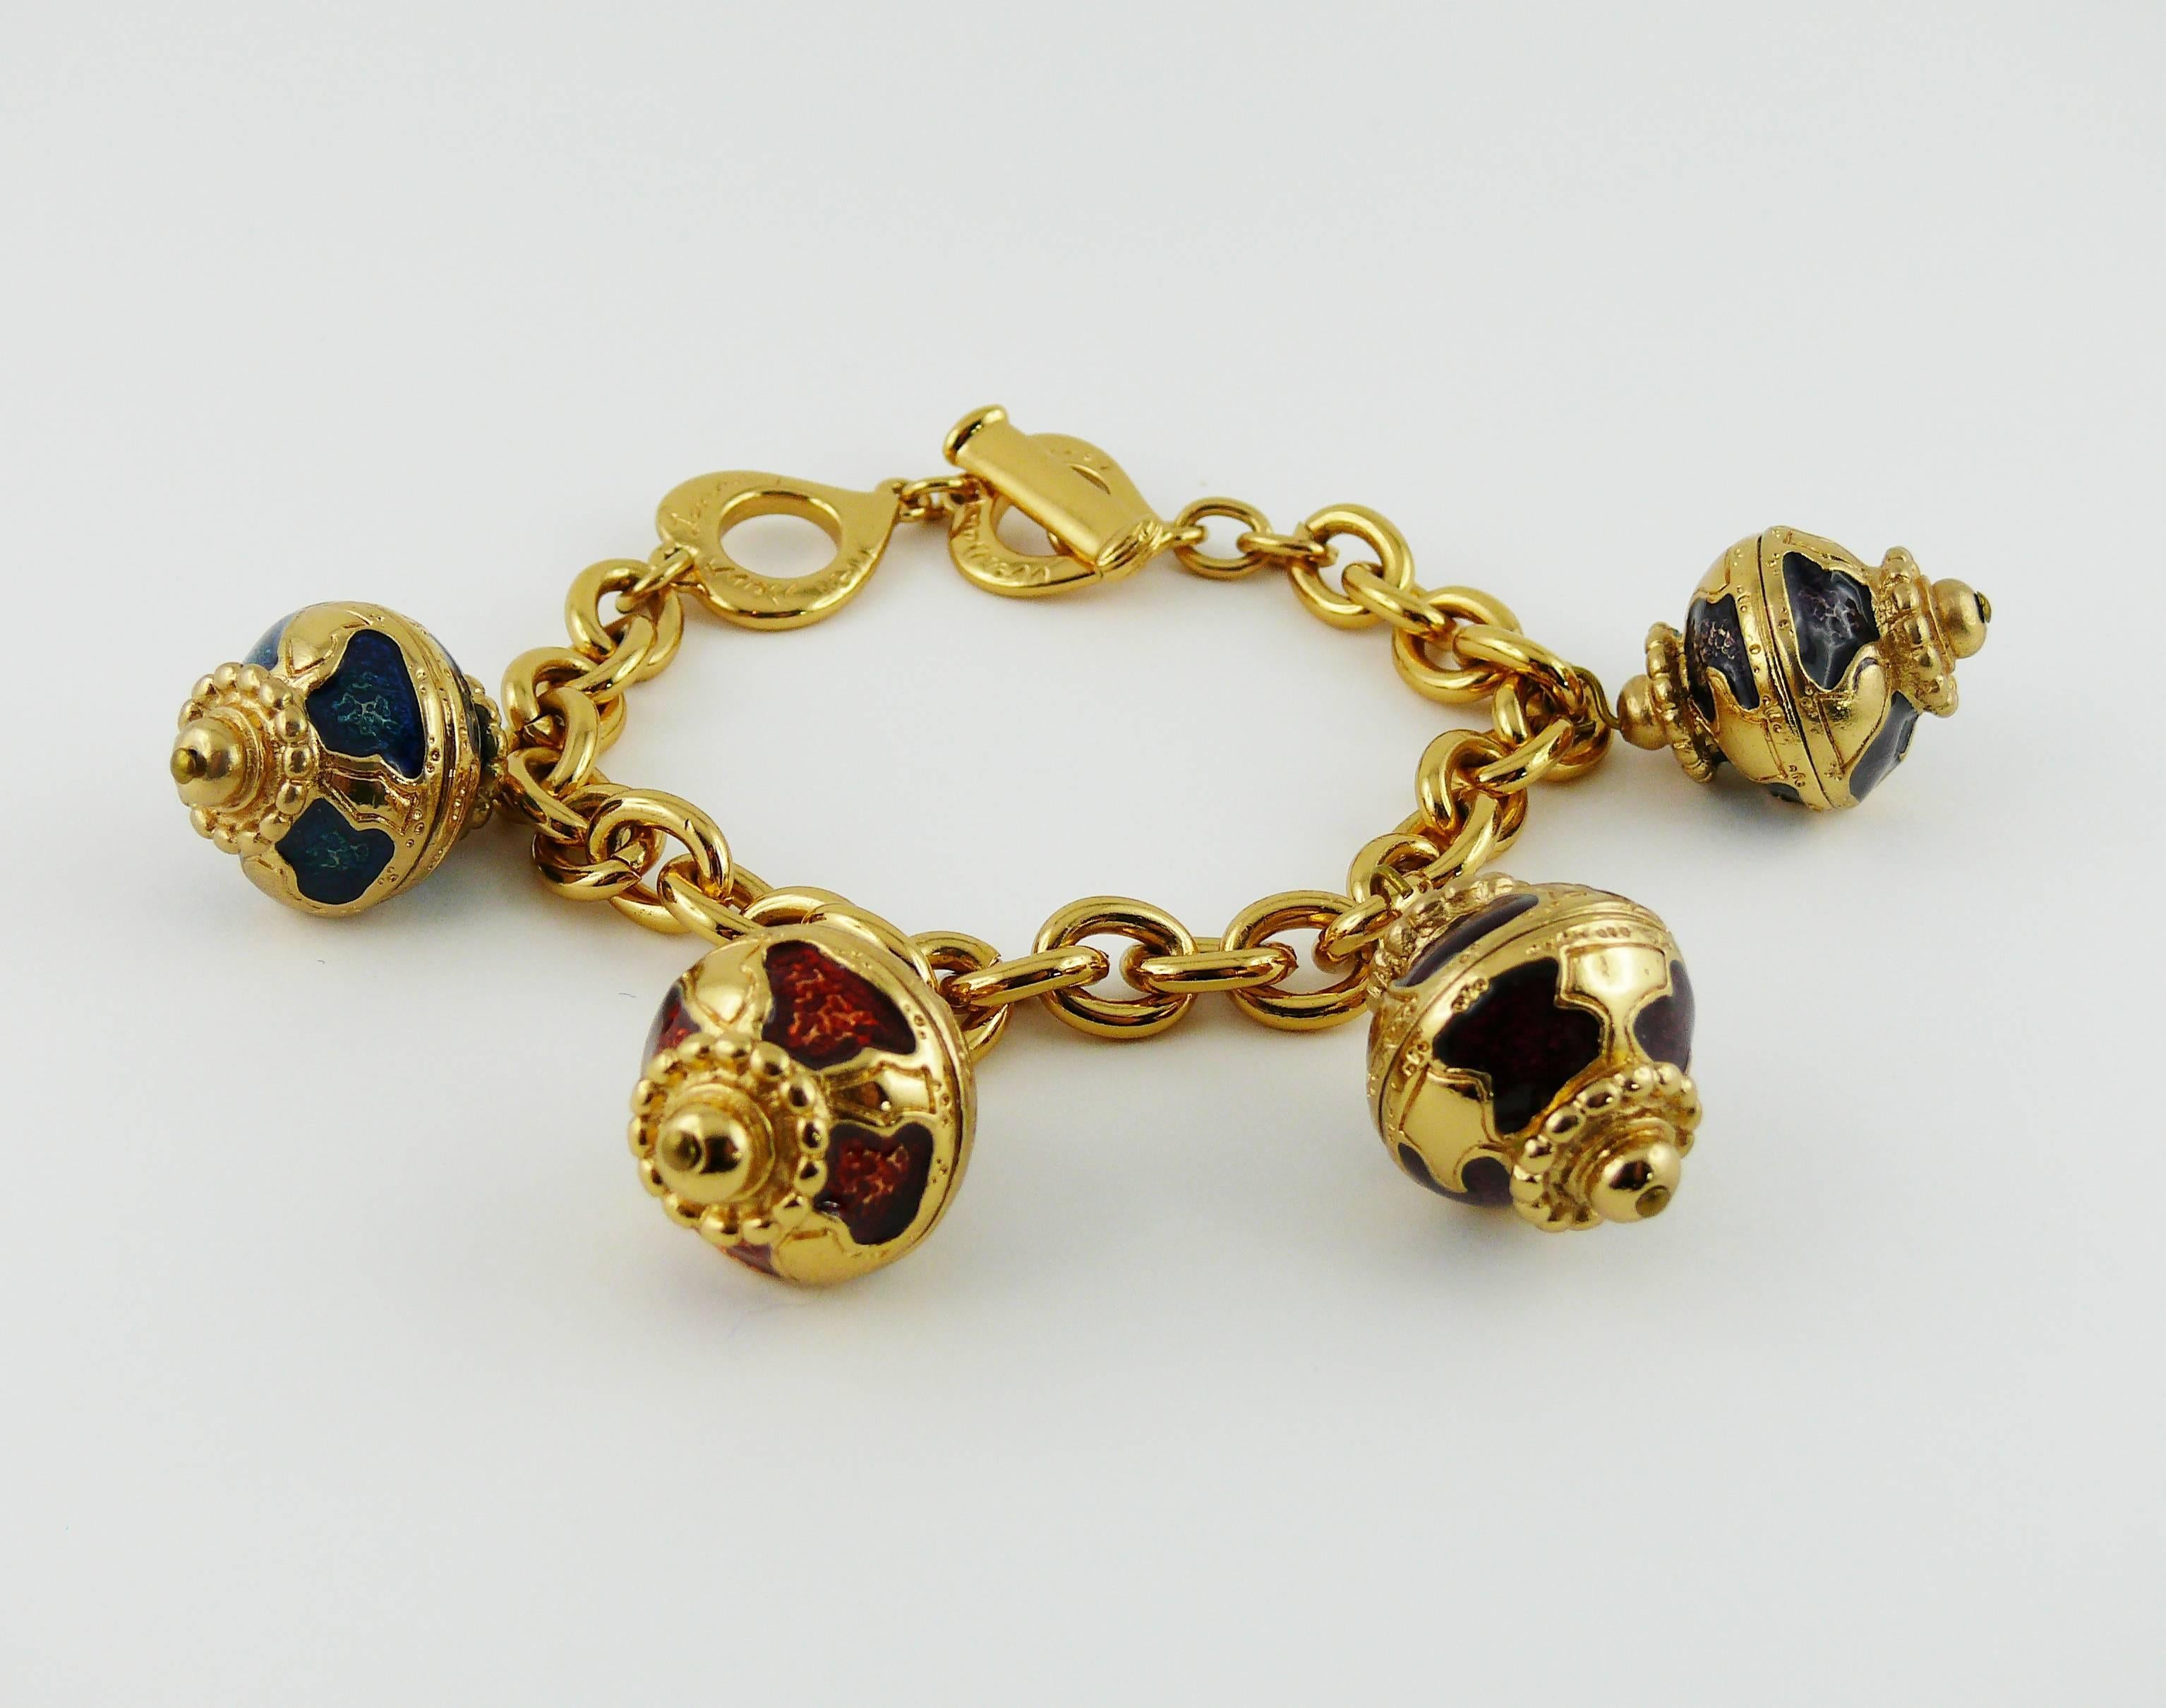 YVES SAINT LAURENT vintage gold tone charm bracelet featuring four gorgeous emaled olive shaped Russian style charms.

Toggle closure.

Embossed YVES SAINT LAURENT Made in France.

Indicative measurements : total length approx. 21 cm (8.27 inches) /